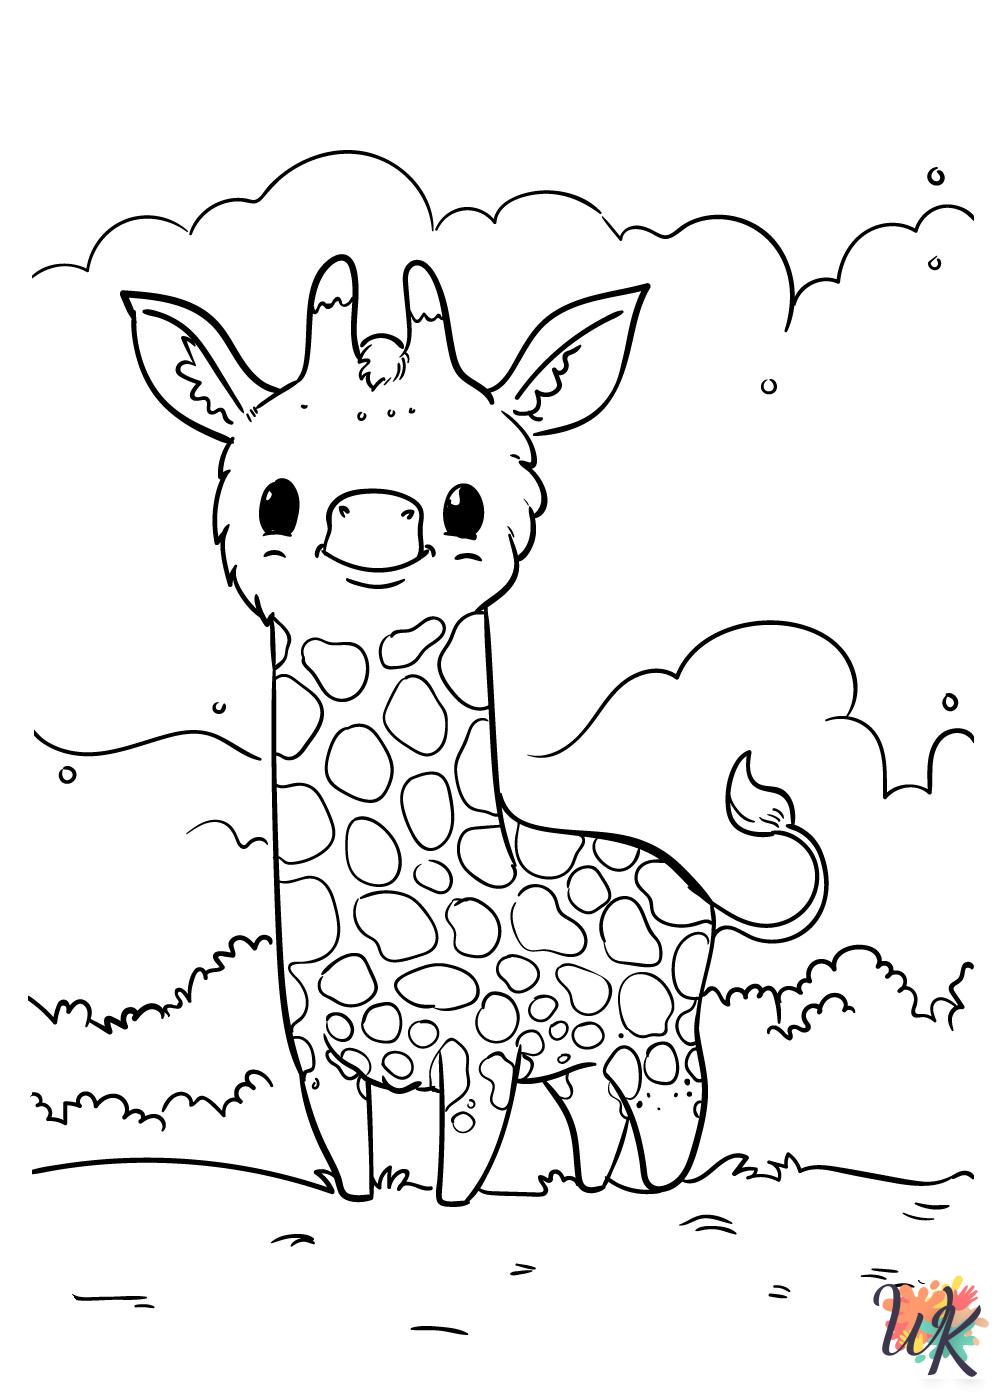 free full size printable Cute Animals coloring pages for adults pdf